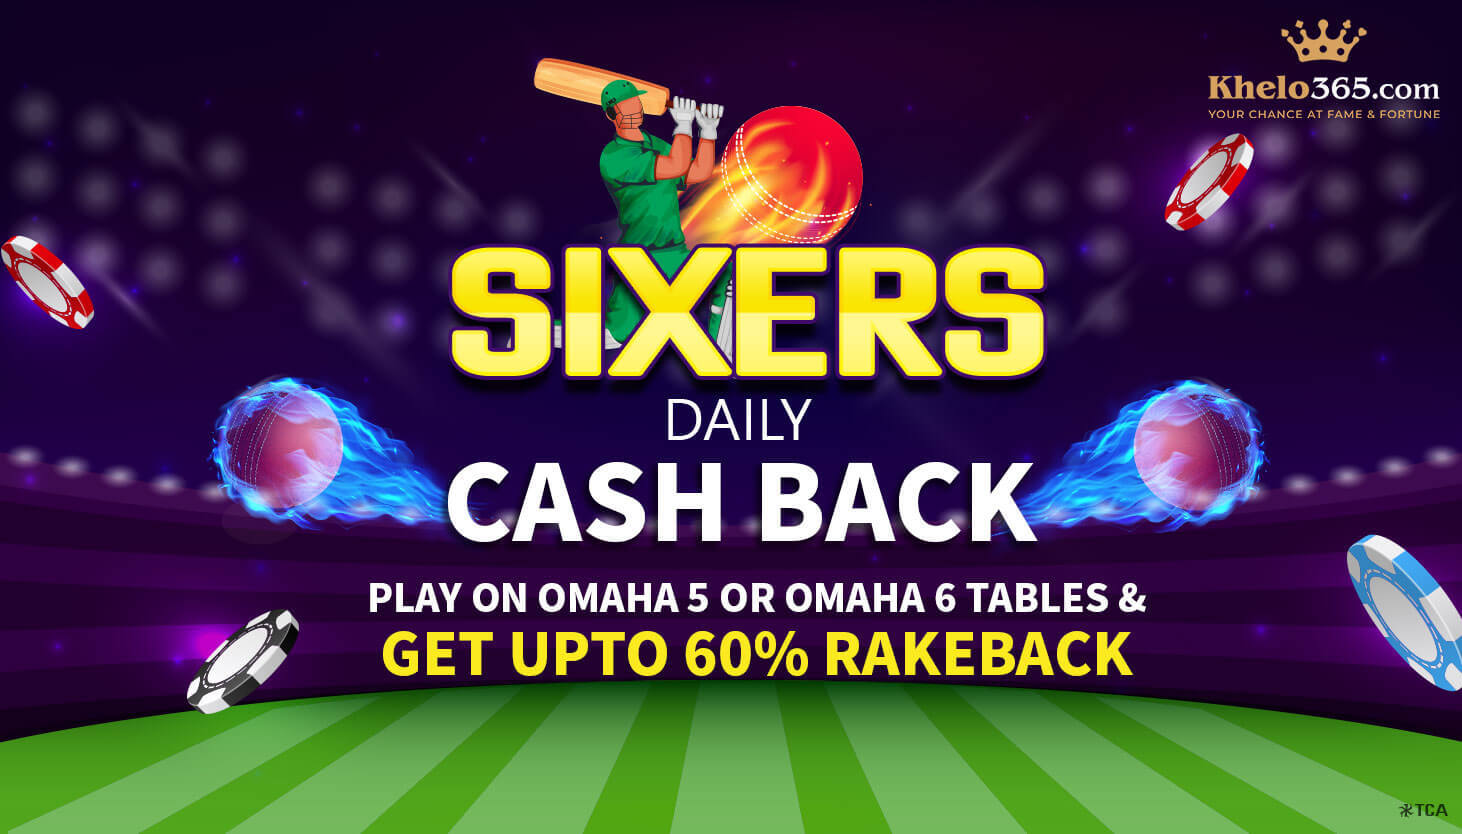 Sixers Daily Cashback